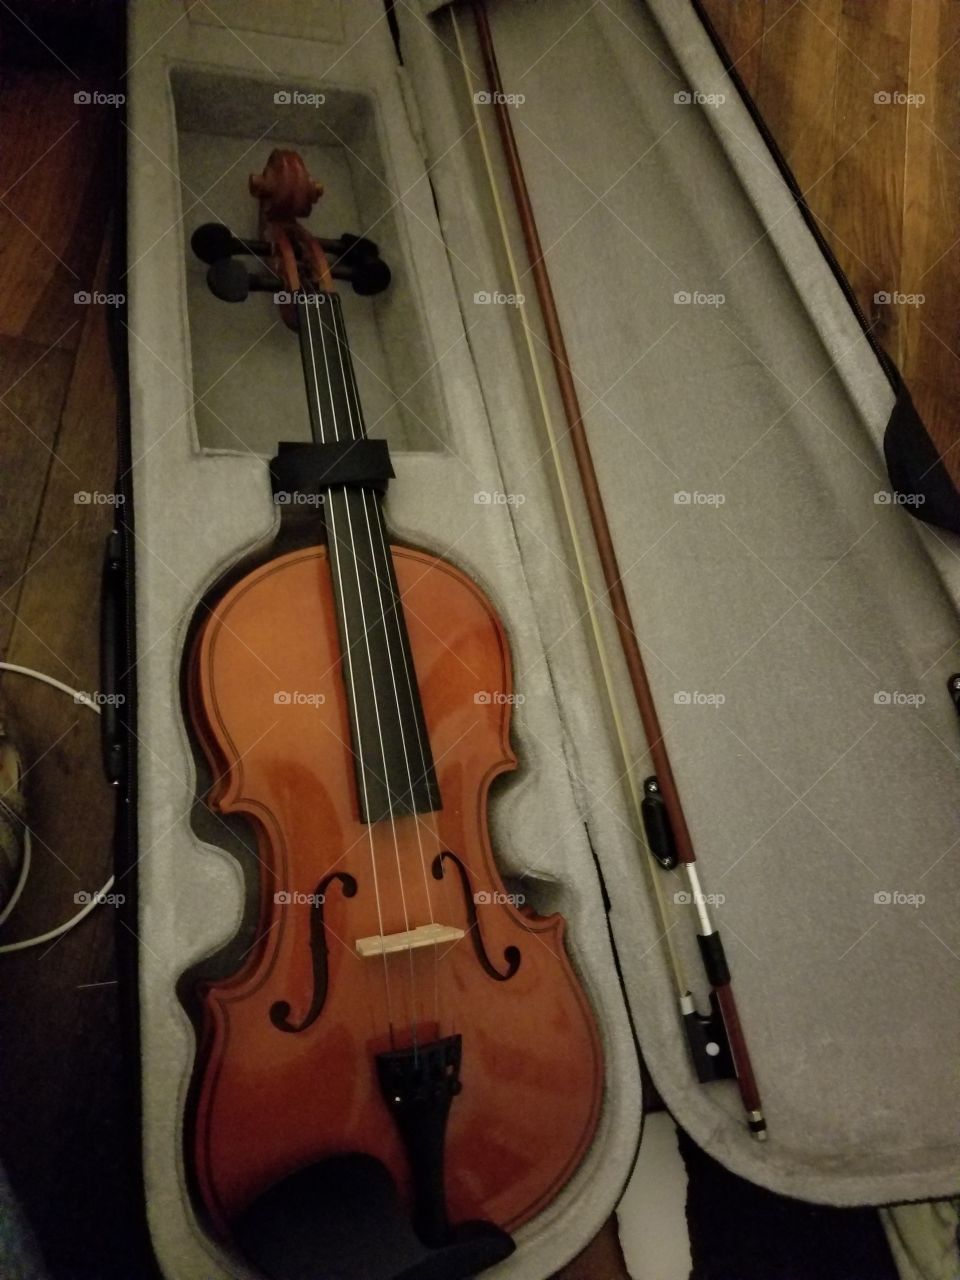 I just got this violin and I am going to be self taught. I played a few songs directed by the seller at a gun show. Many many years ago.